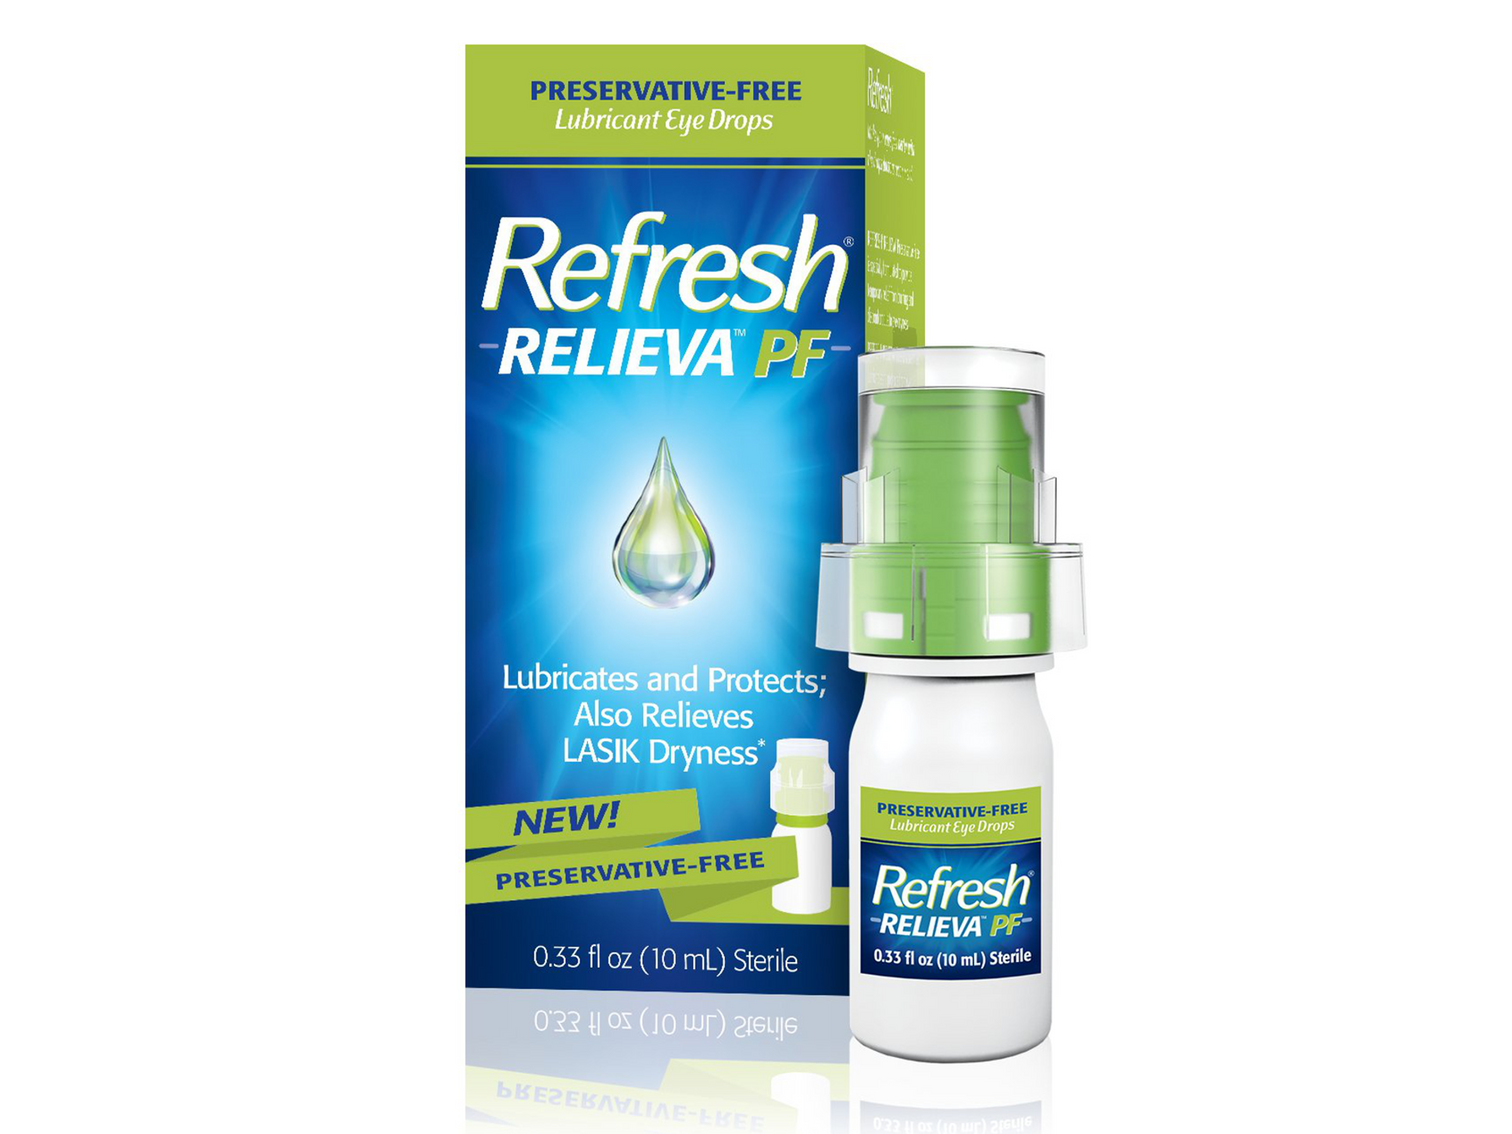 Refresh Plus® Lubricant Eye Drops - Single-Use Containers